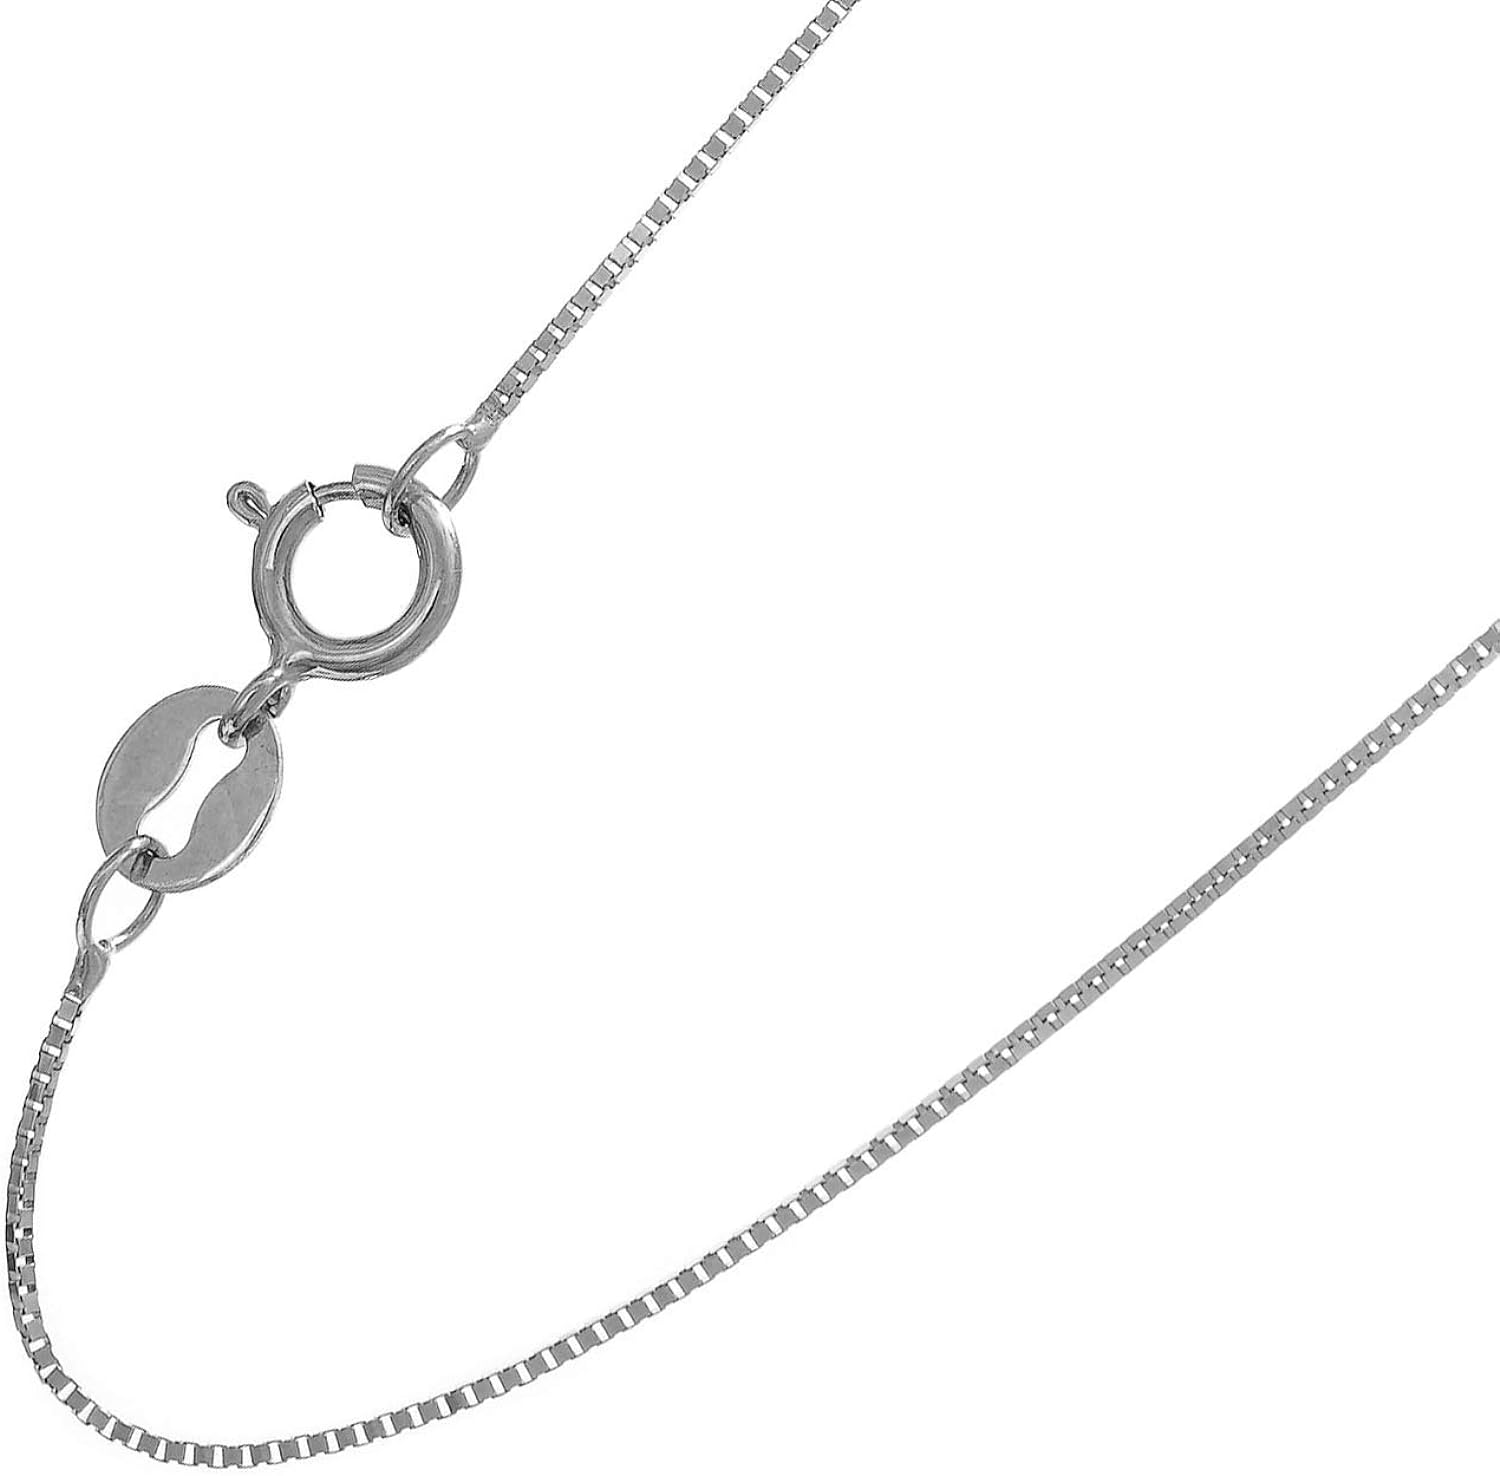 JewelStop 925 Sterling Silver Rhodium Plated 0.7 mm Box Chain Necklace, Spring Ring Clasp - 20 Inches, 1.6gr.